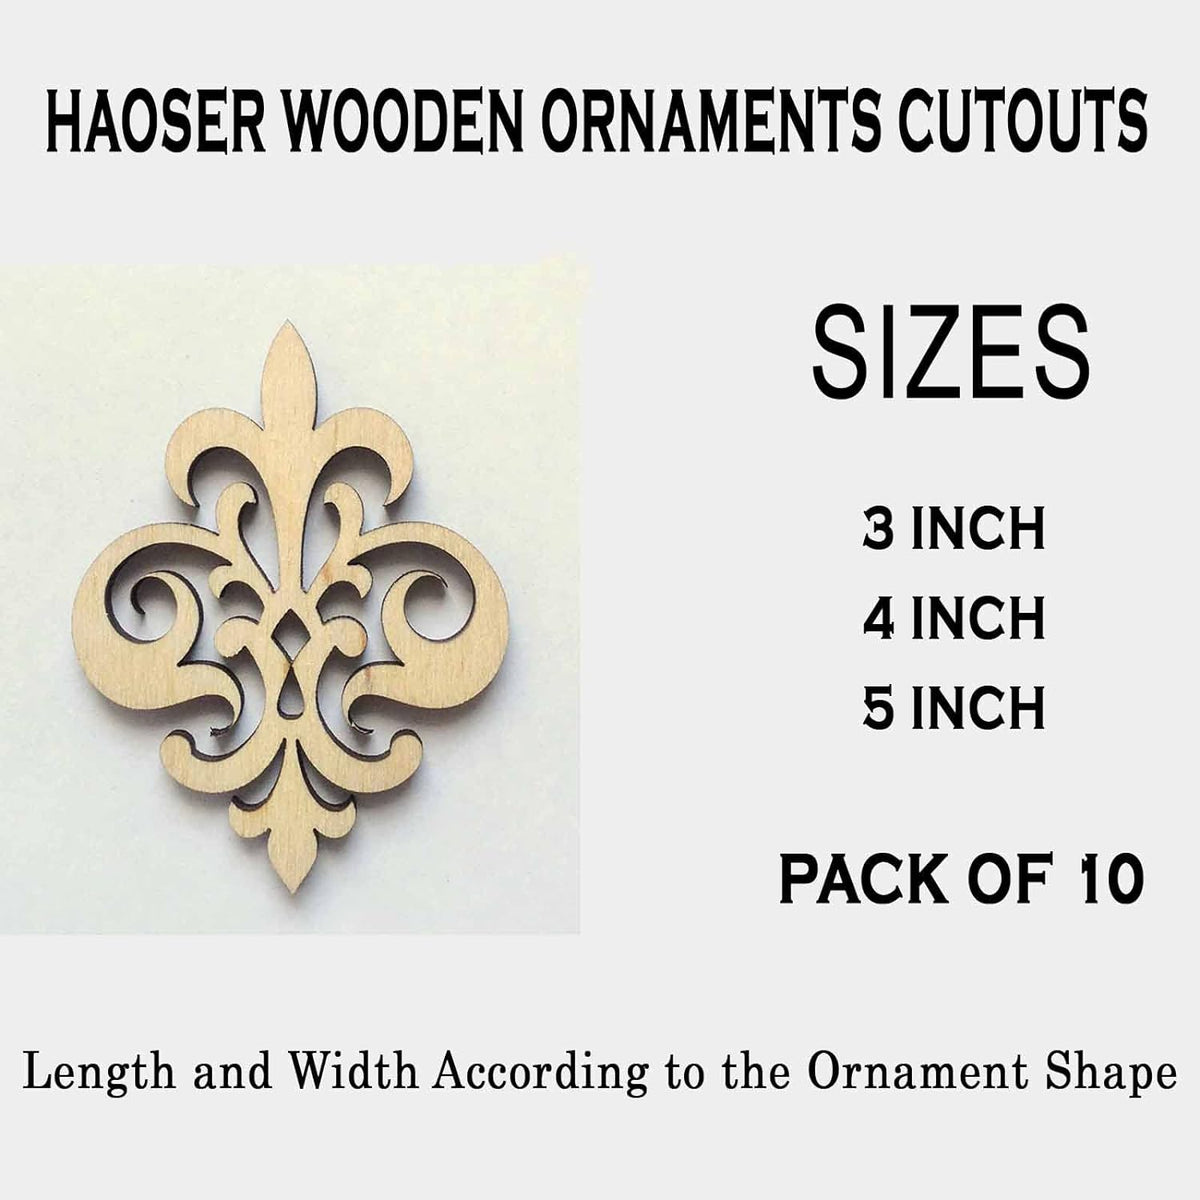 Wooden Ornaments Cutouts for Home Decor, Laser Cut Wood Cutouts for DIY Craft Project (Pine MDF_Ornament-5_3 Inch_Pack of 10) - Haoser